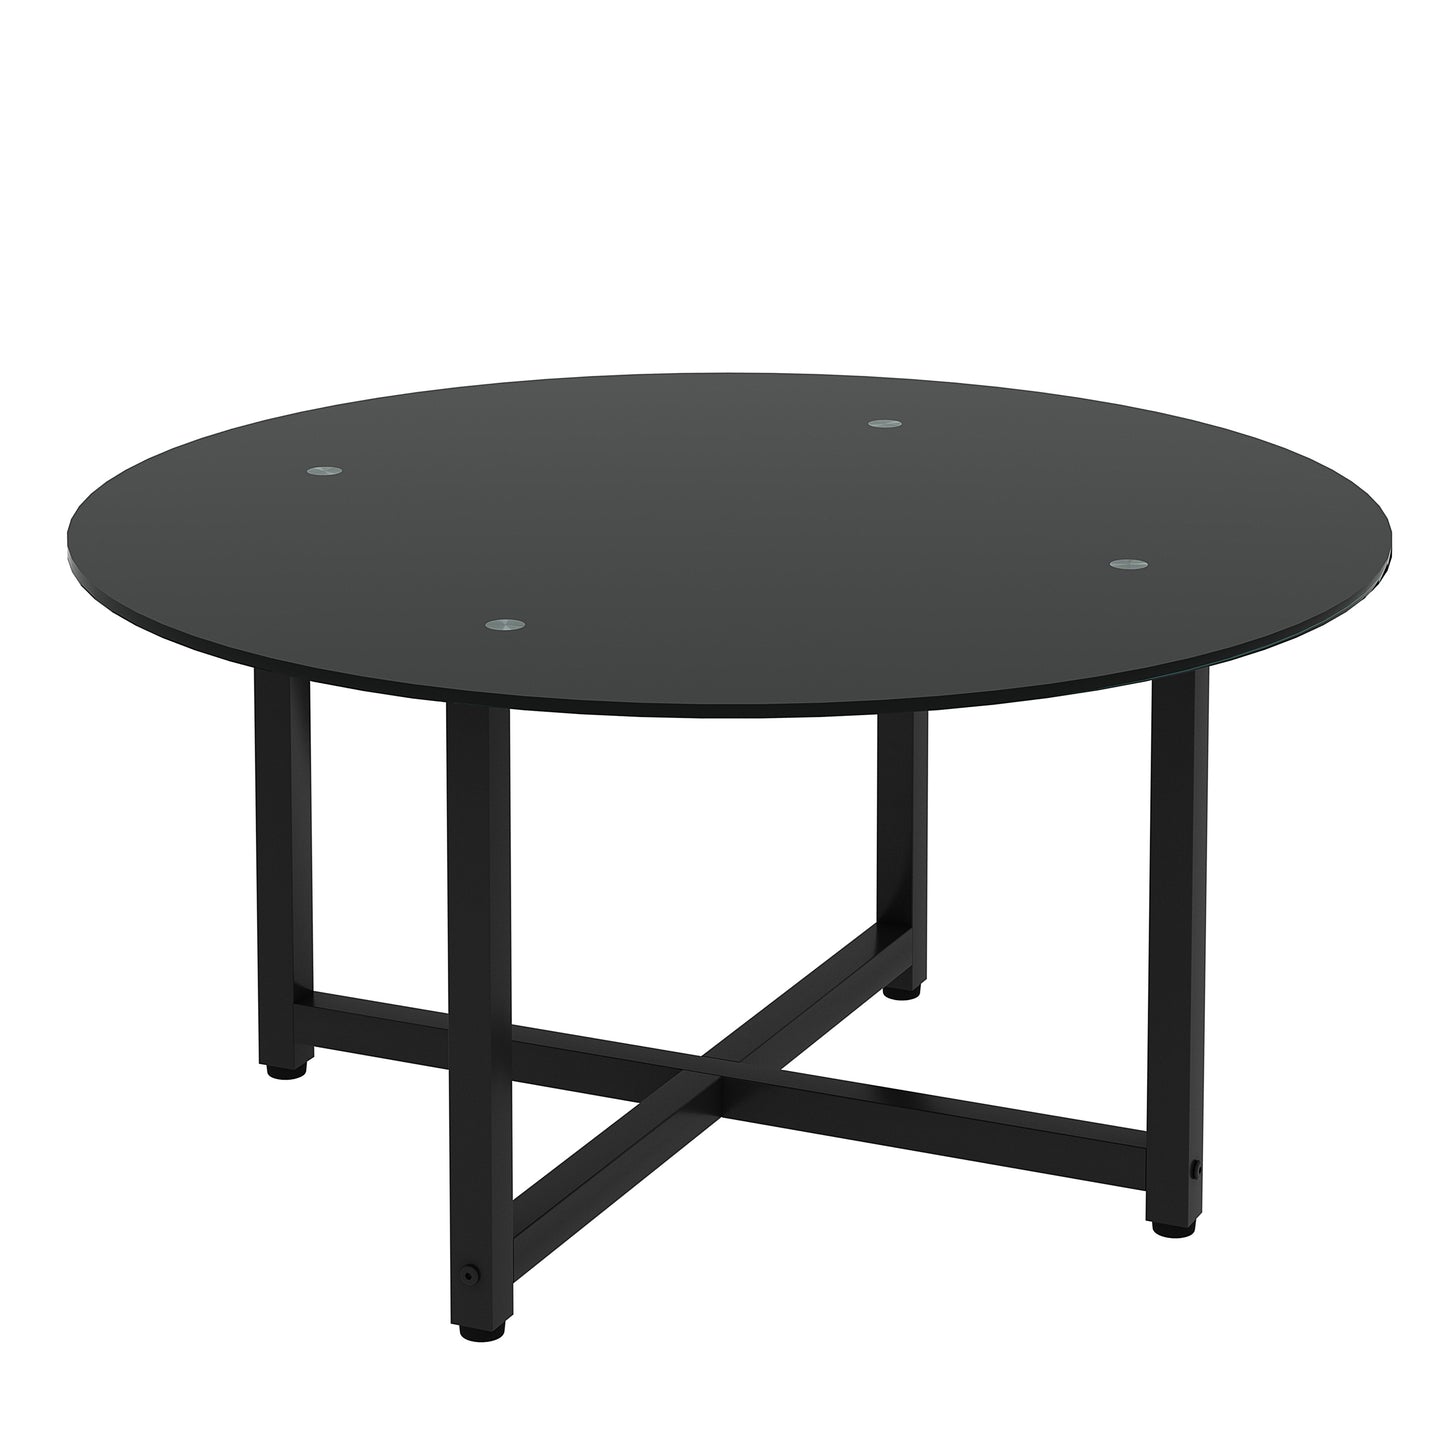 35.5" Round Whole Black Coffee Table, Clear Coffee Table, Modern Side Center Tables for Living Room, Living Room Furniture